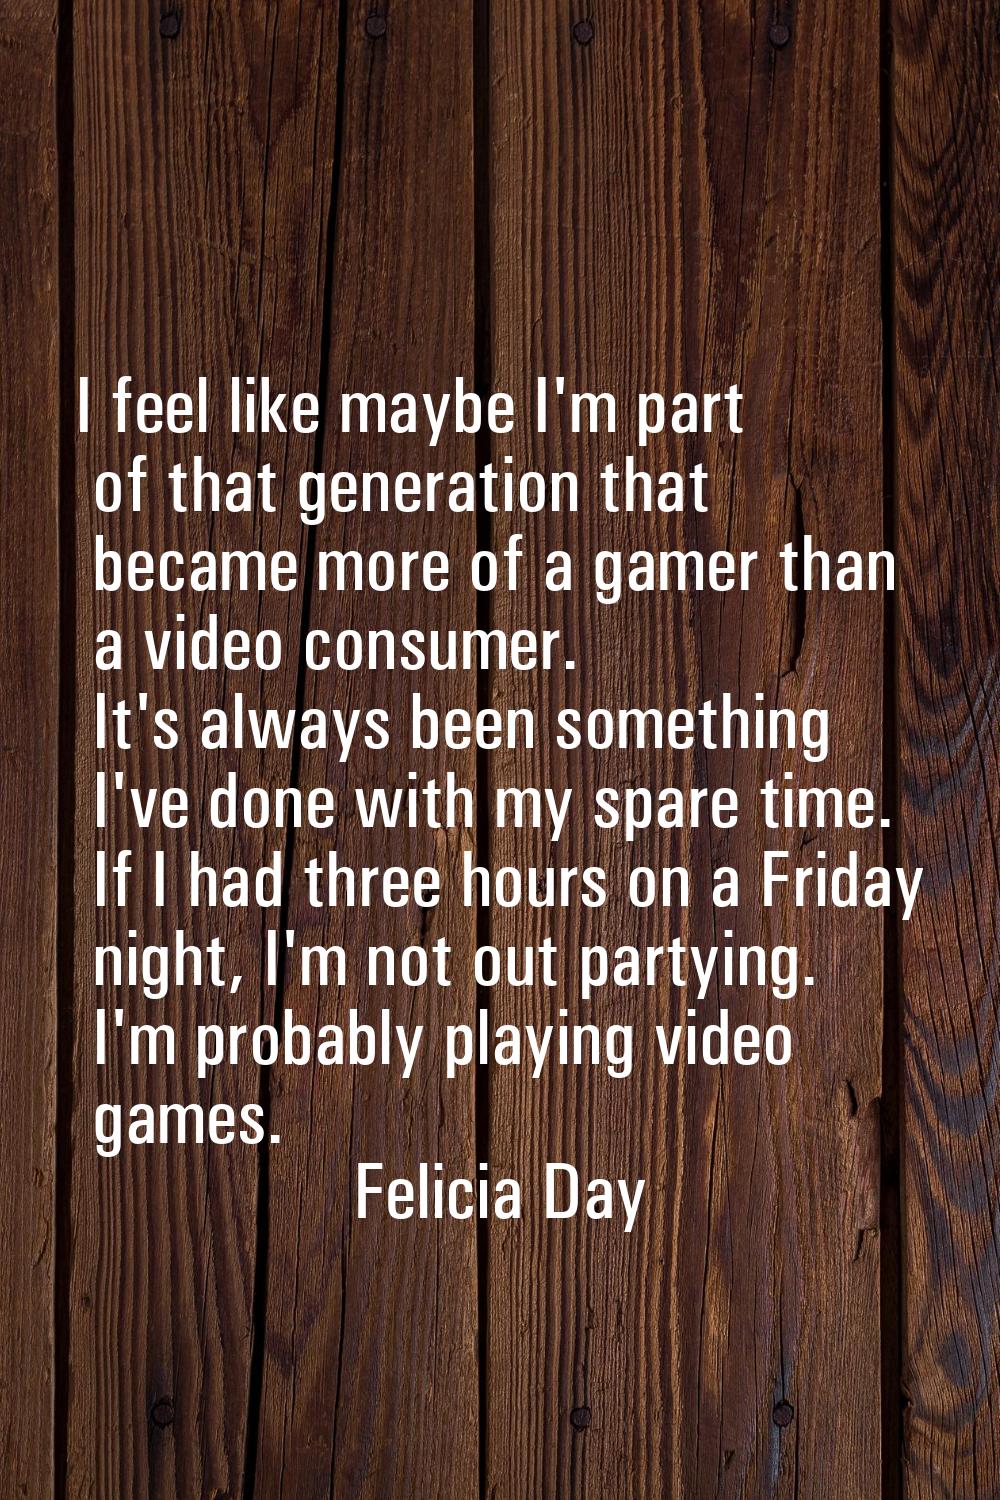 I feel like maybe I'm part of that generation that became more of a gamer than a video consumer. It